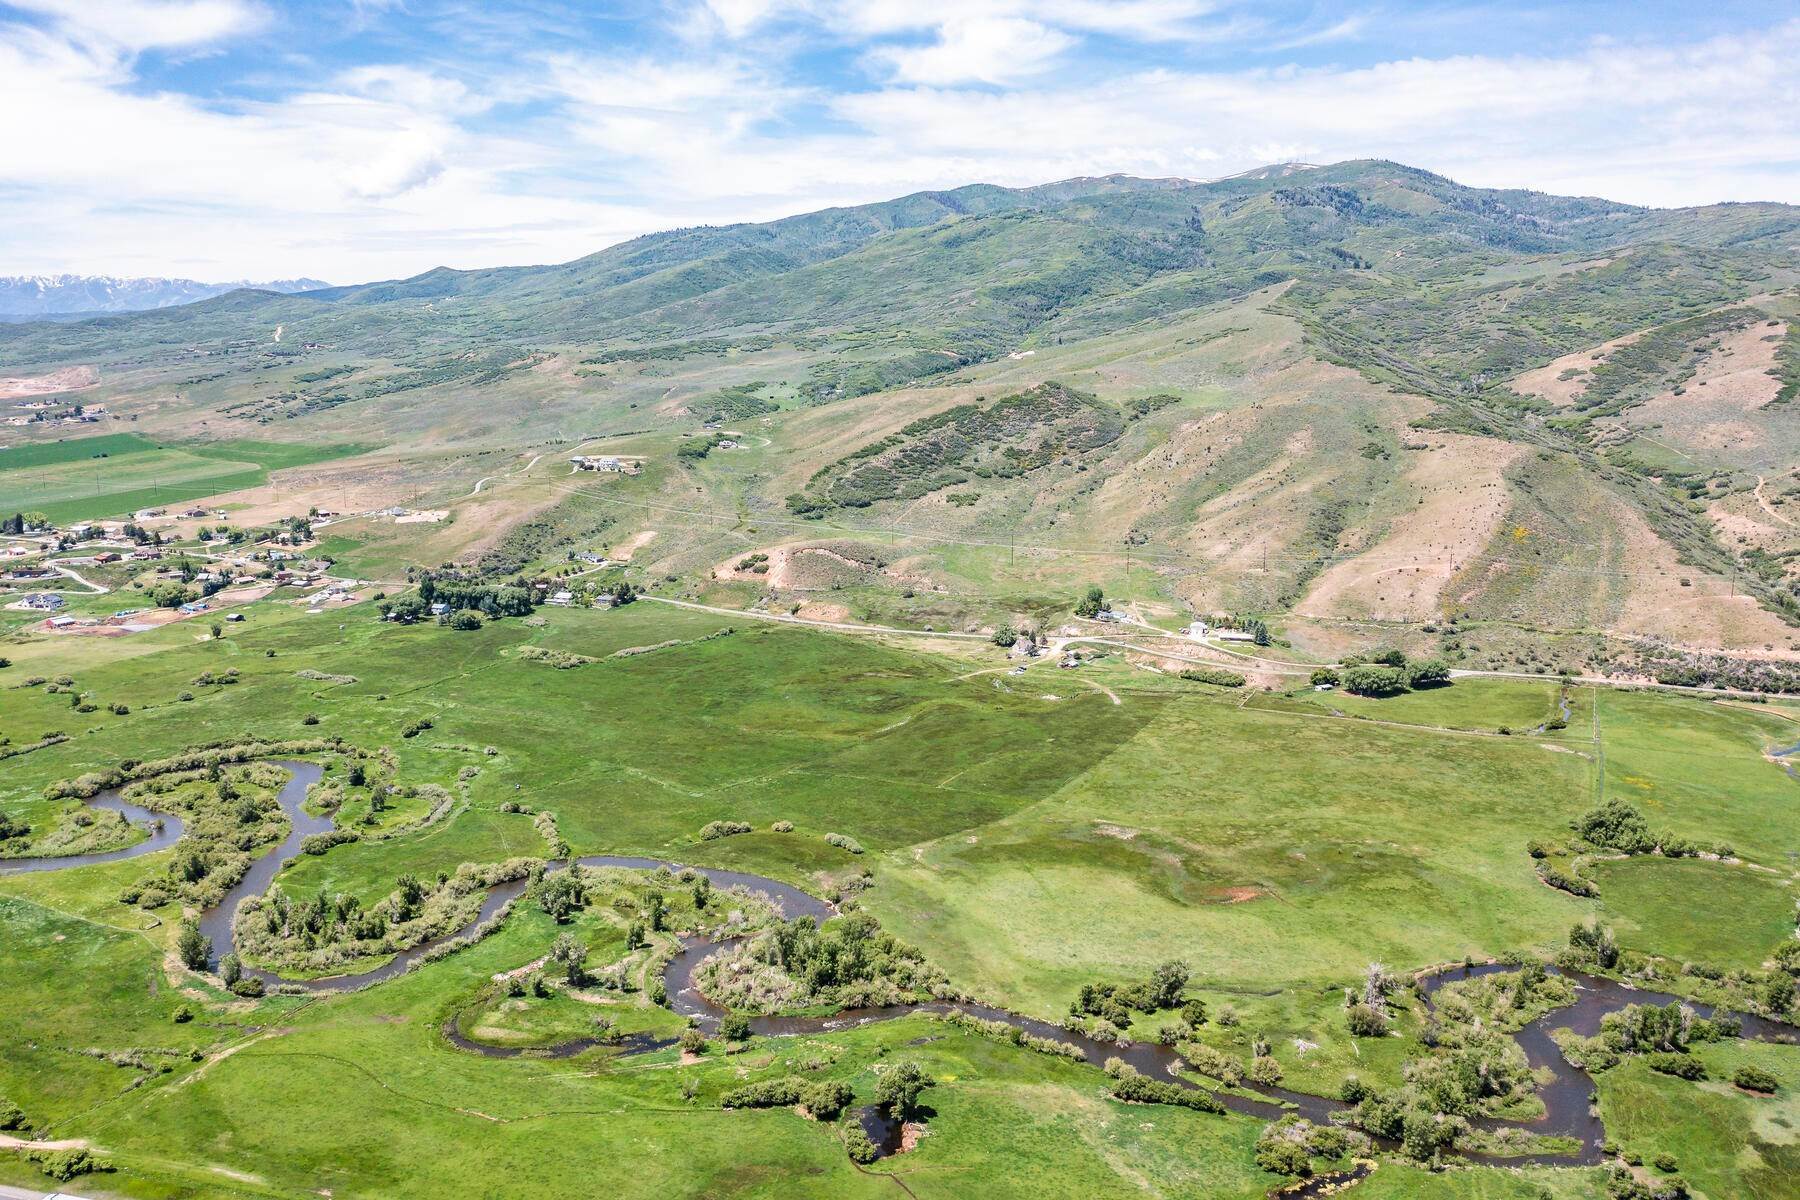 Farm and Ranch Properties for Sale at 270 Acres on the Weber River only 15 minutes from Park City 1255 S West Hoytsville Rd Hoytsville, Utah 84017 United States